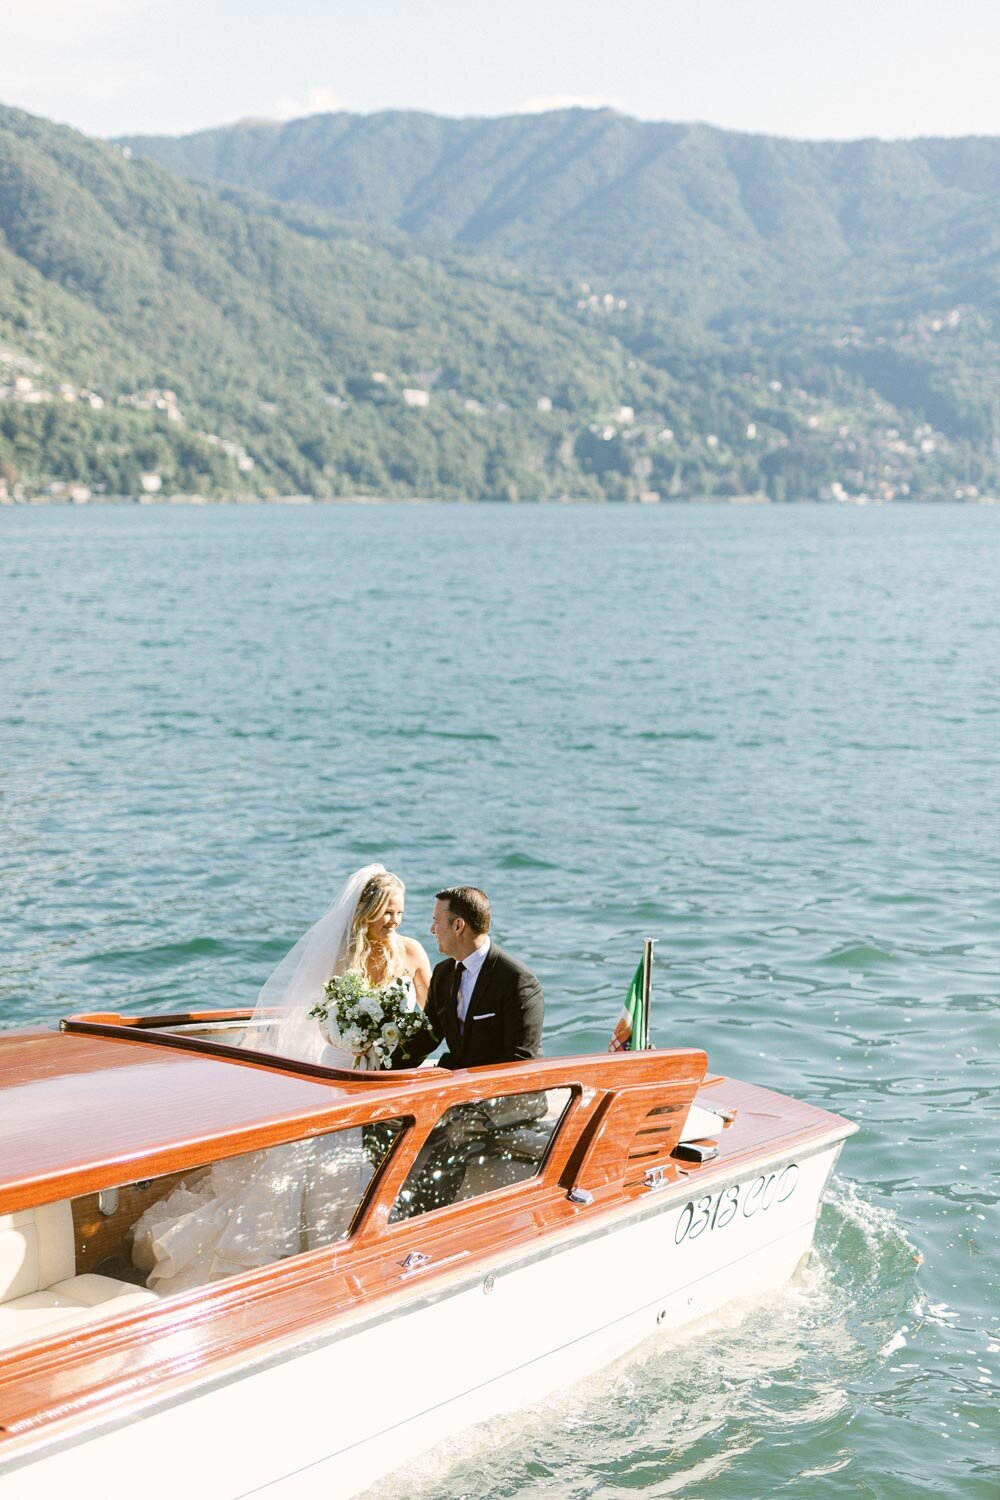 boat ride at lake como with bride and groom